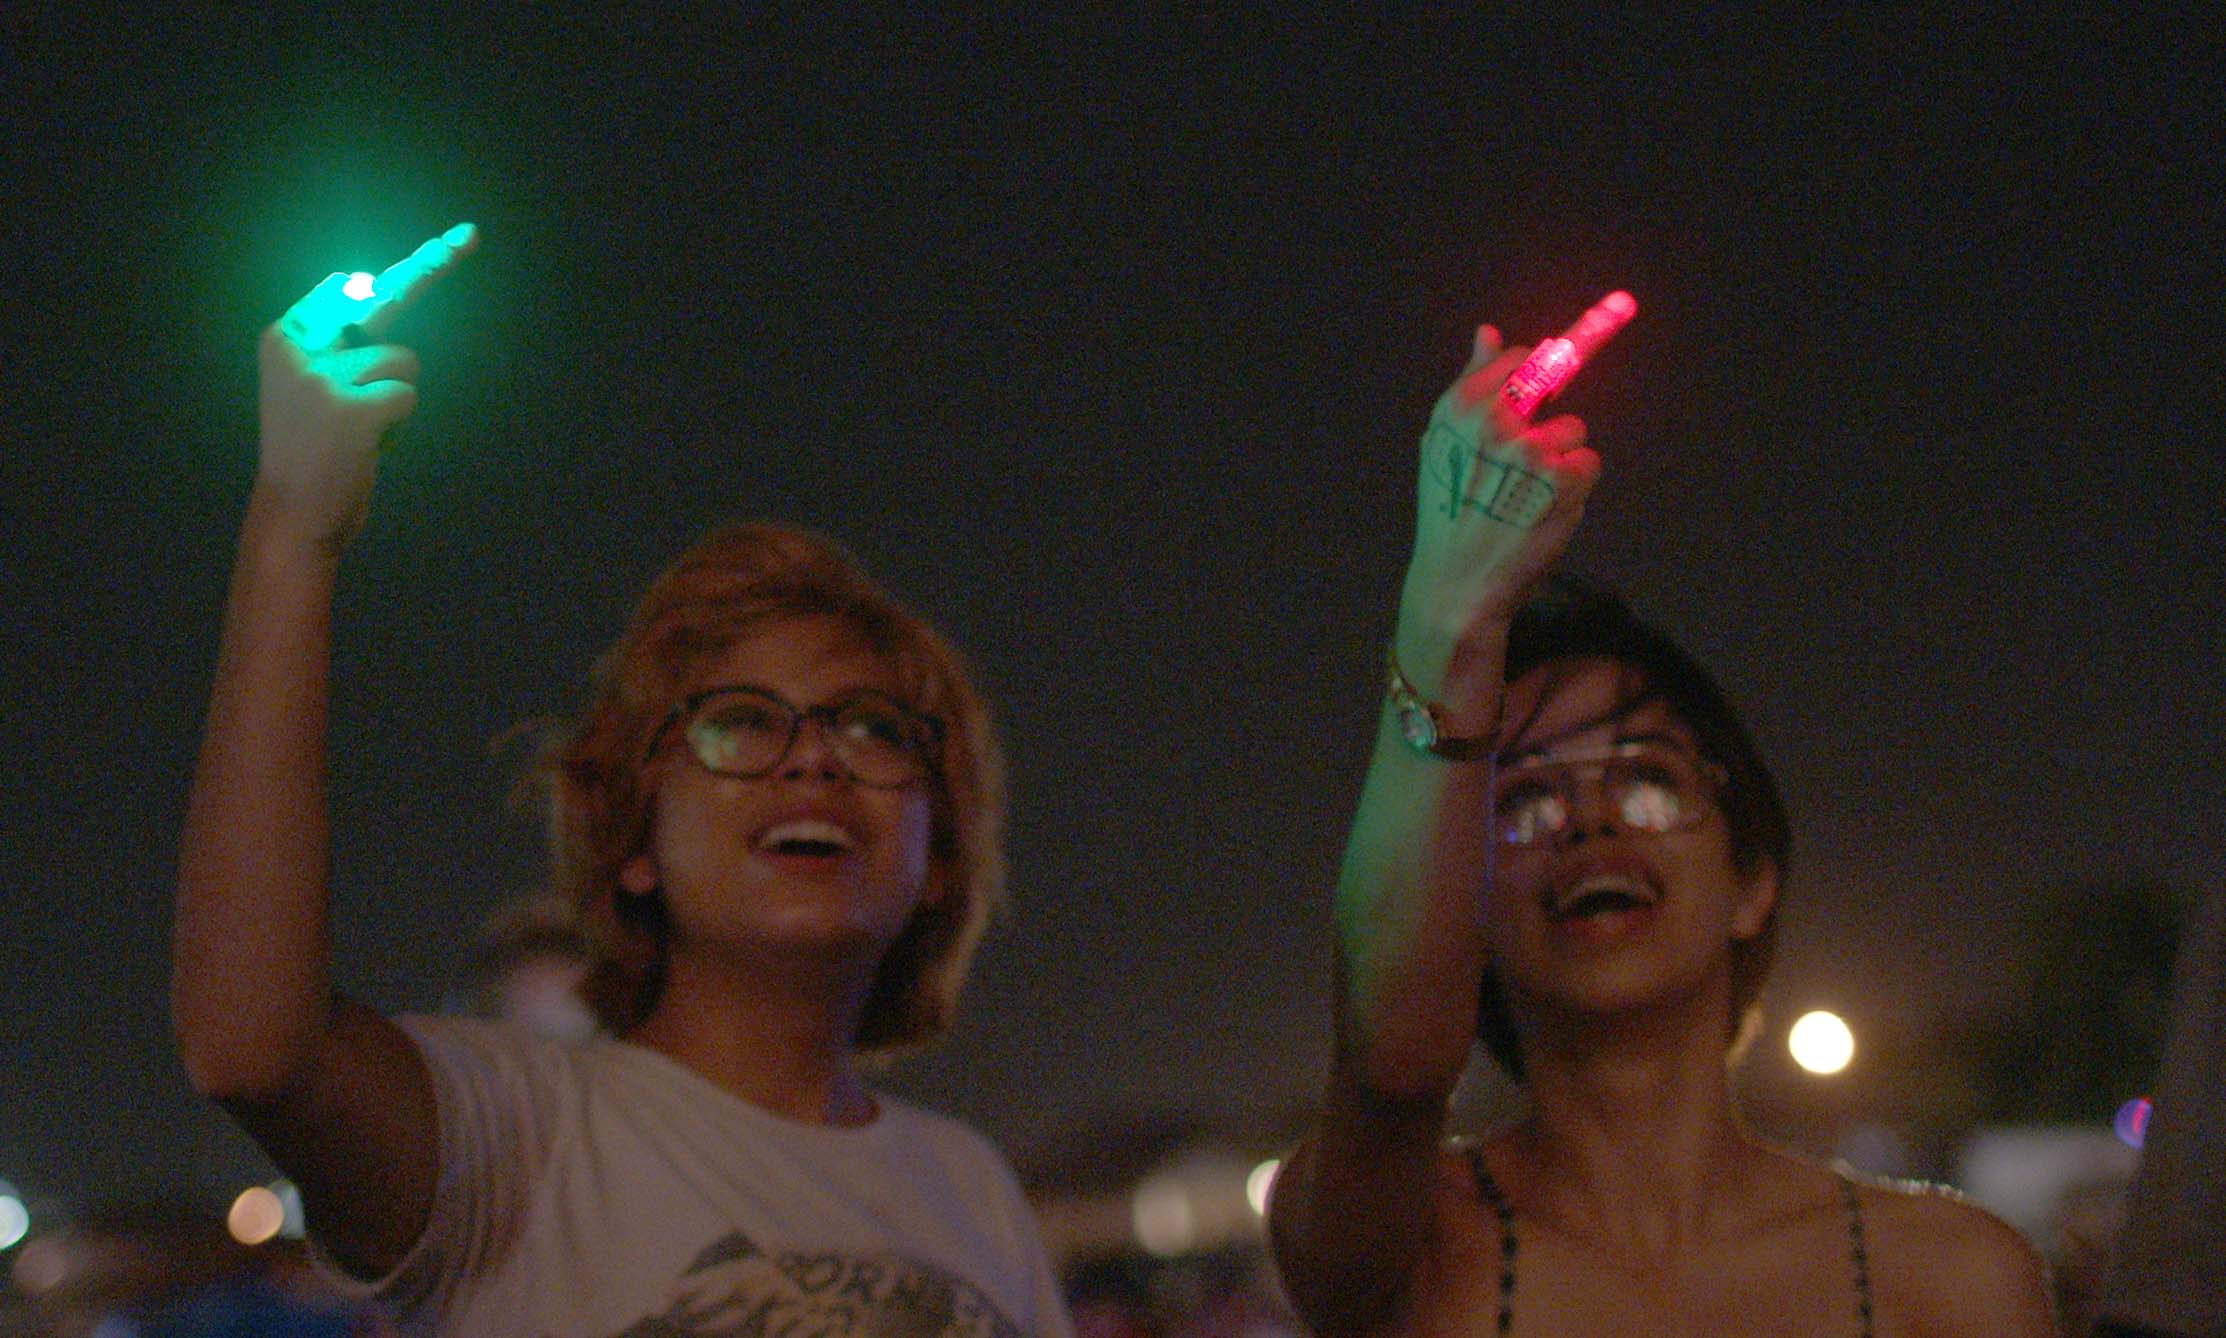 Silvia and Beba smile as they point their middle finger at the fire-work lit sky. There is a red light on Beba's middle finger, and a green light on Silvia's.